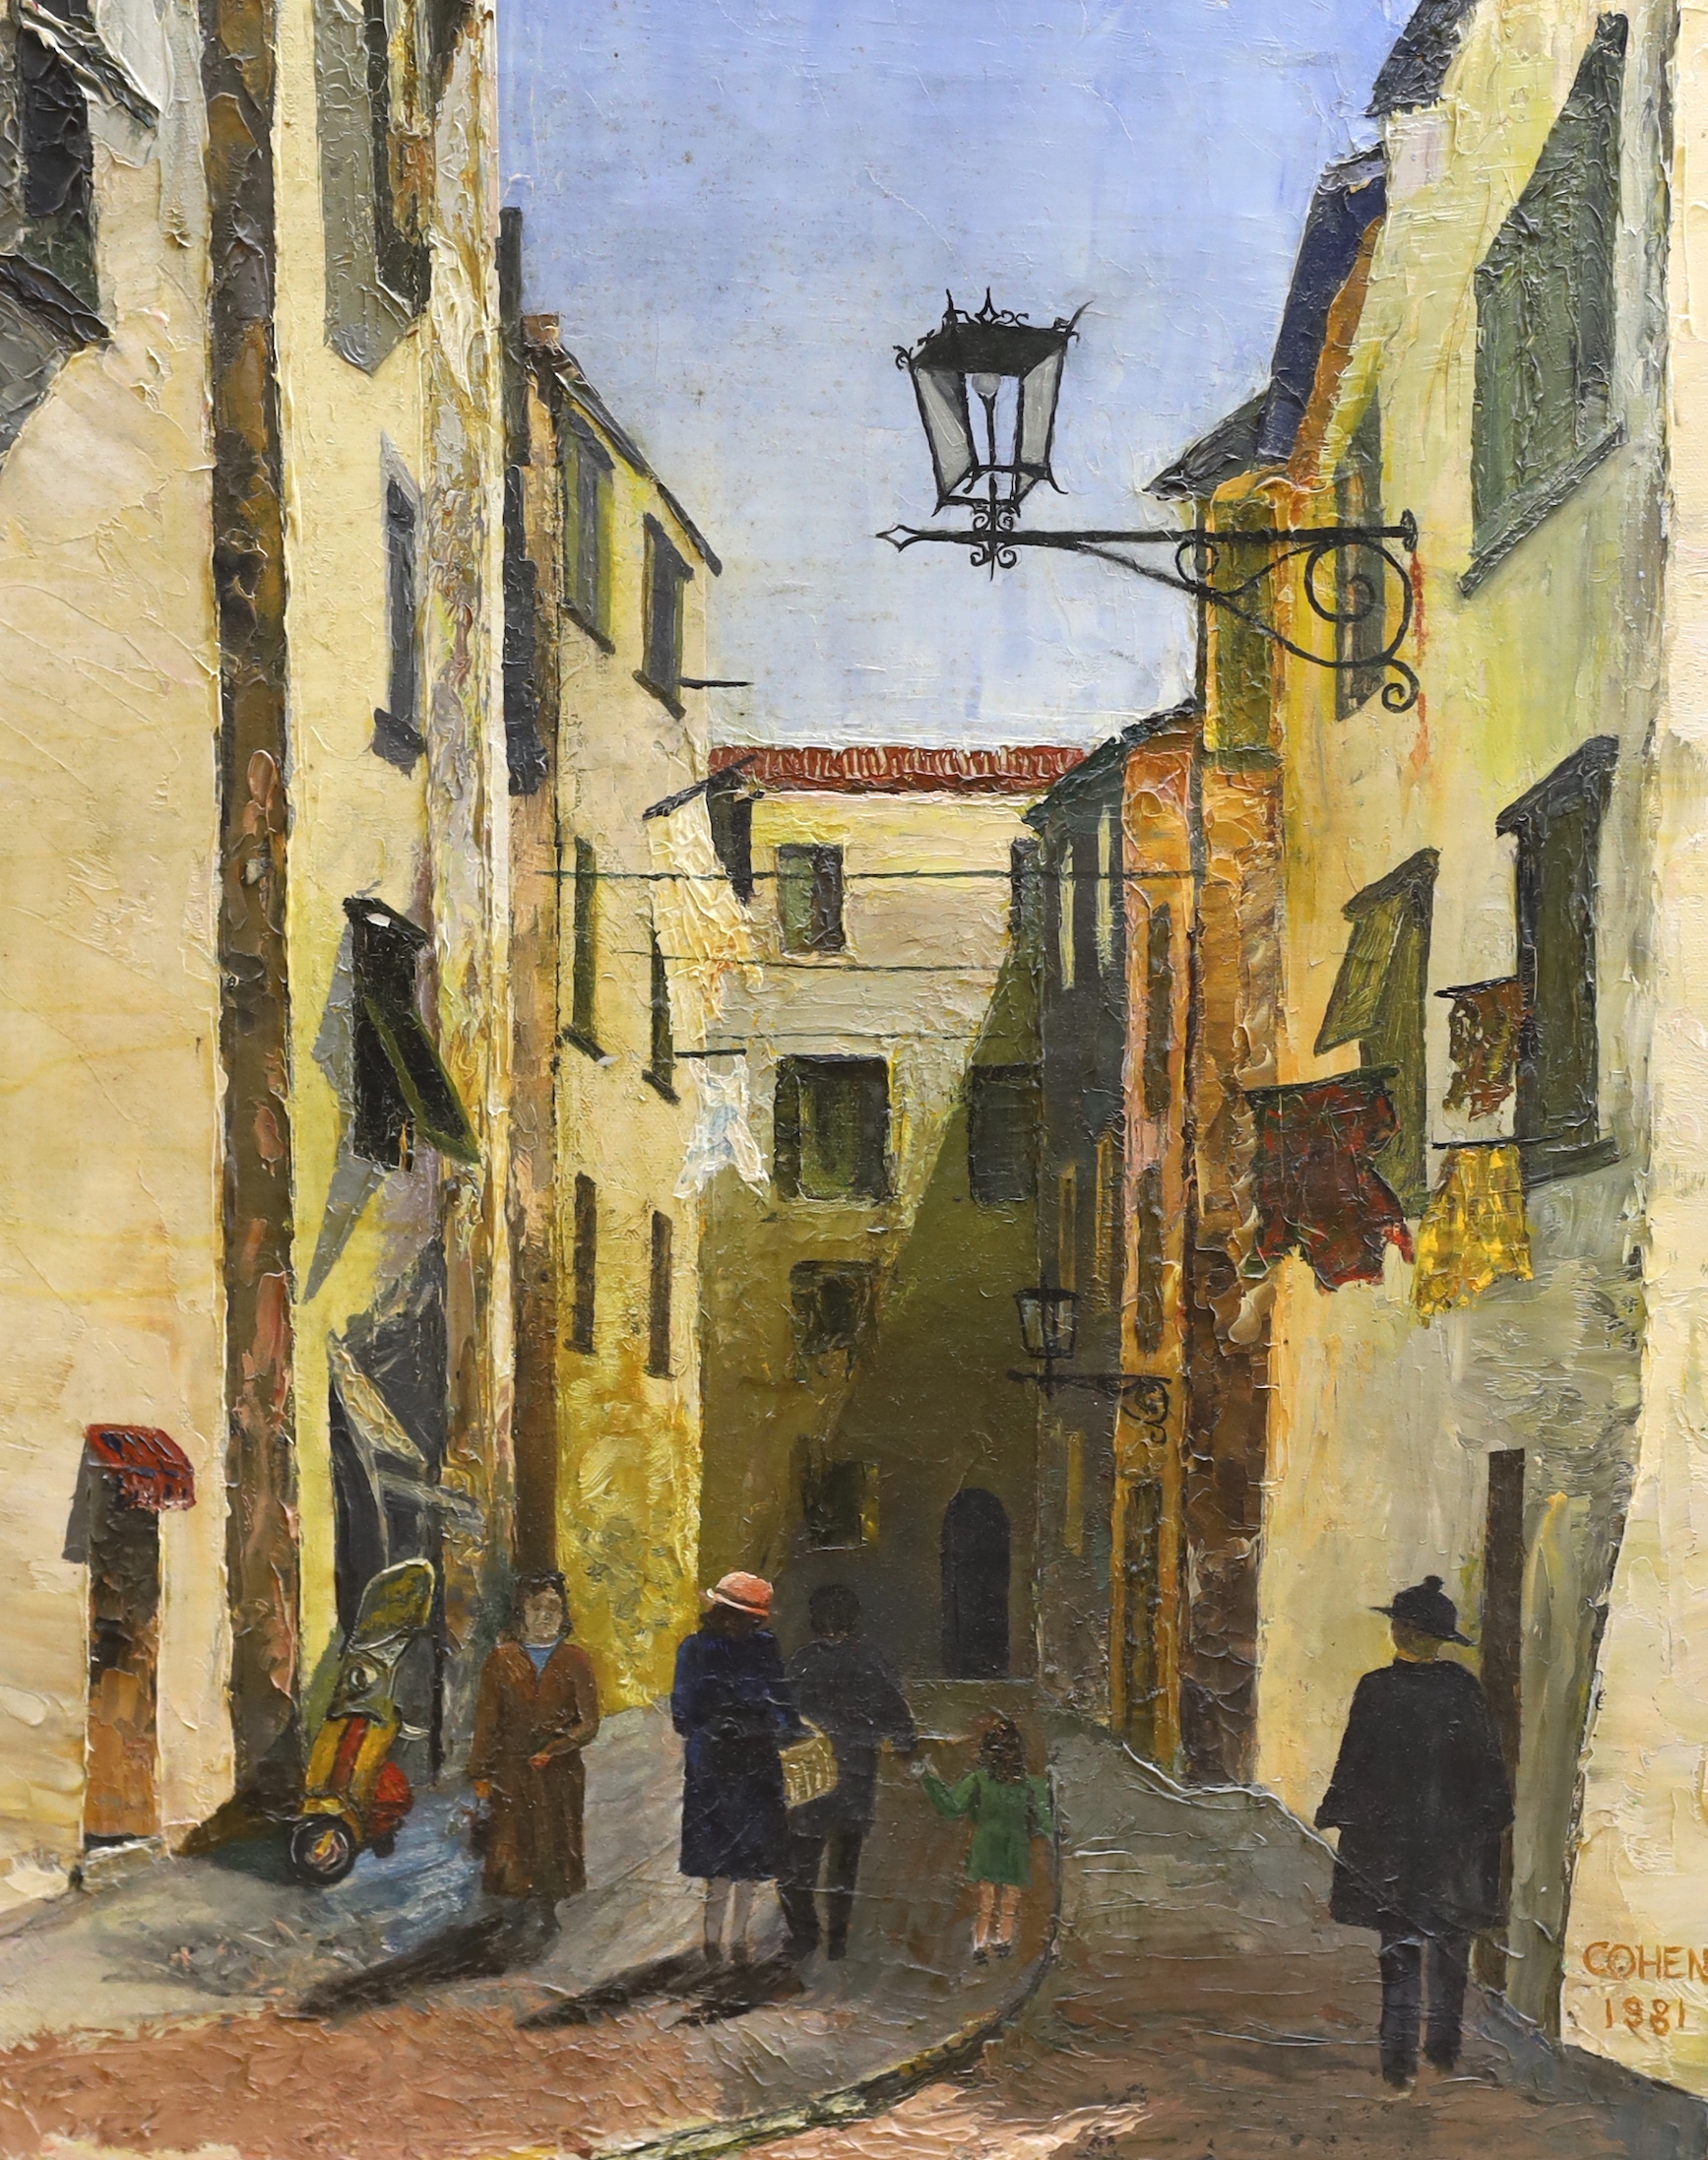 Cohen, impasto oil on canvas, Continental street scene with figures, signed and dated 1981, 50 x 40cm, unframed